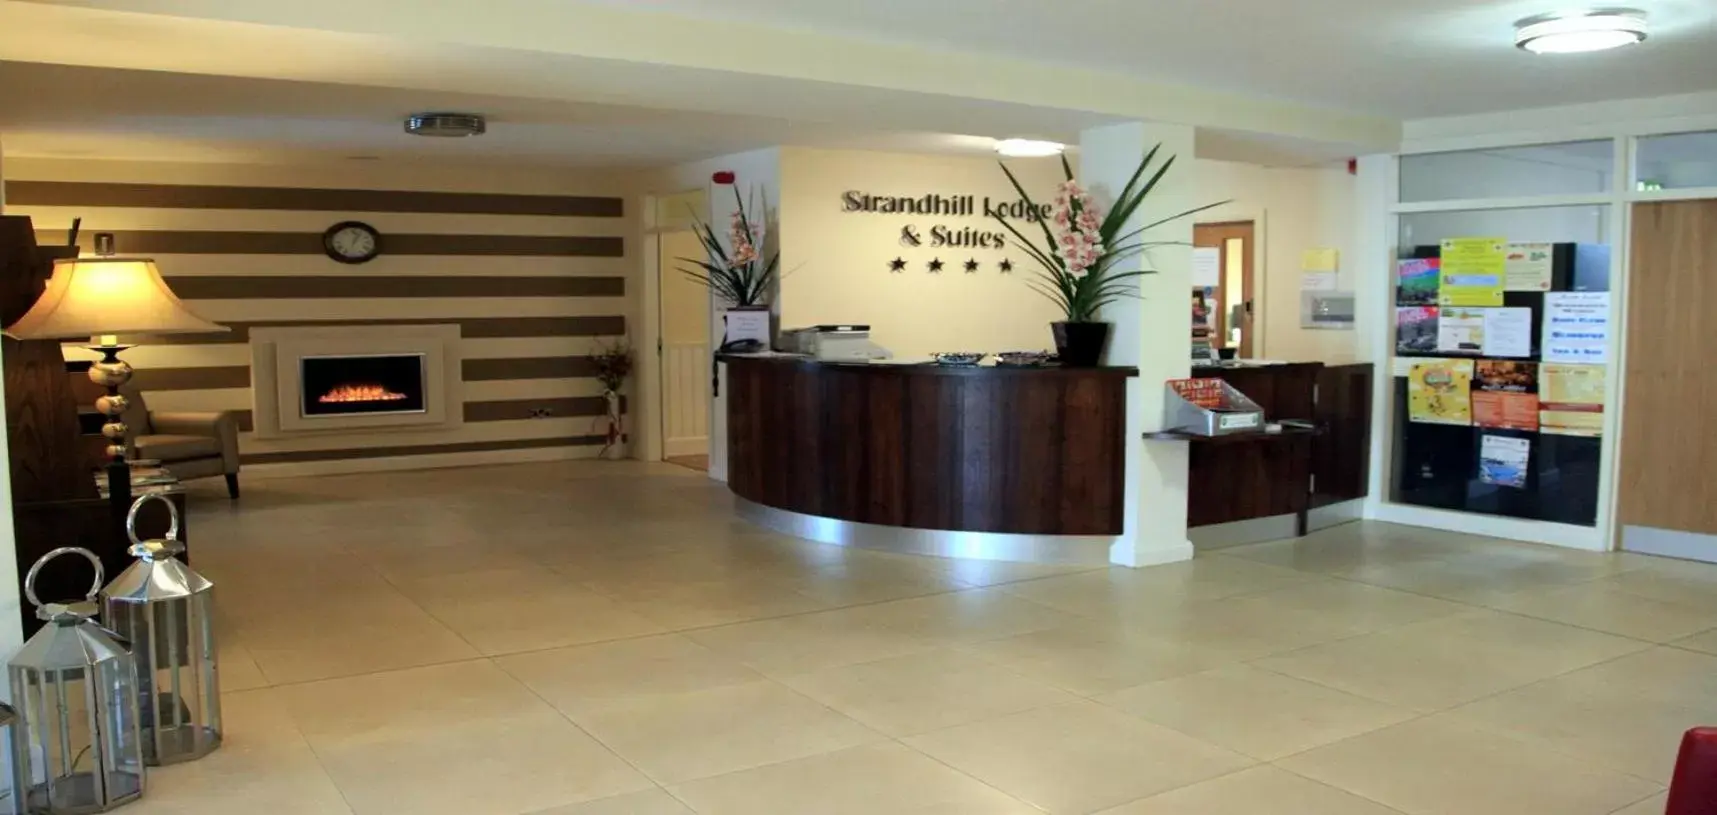 Lobby or reception, Lobby/Reception in Strandhill Lodge and Suites